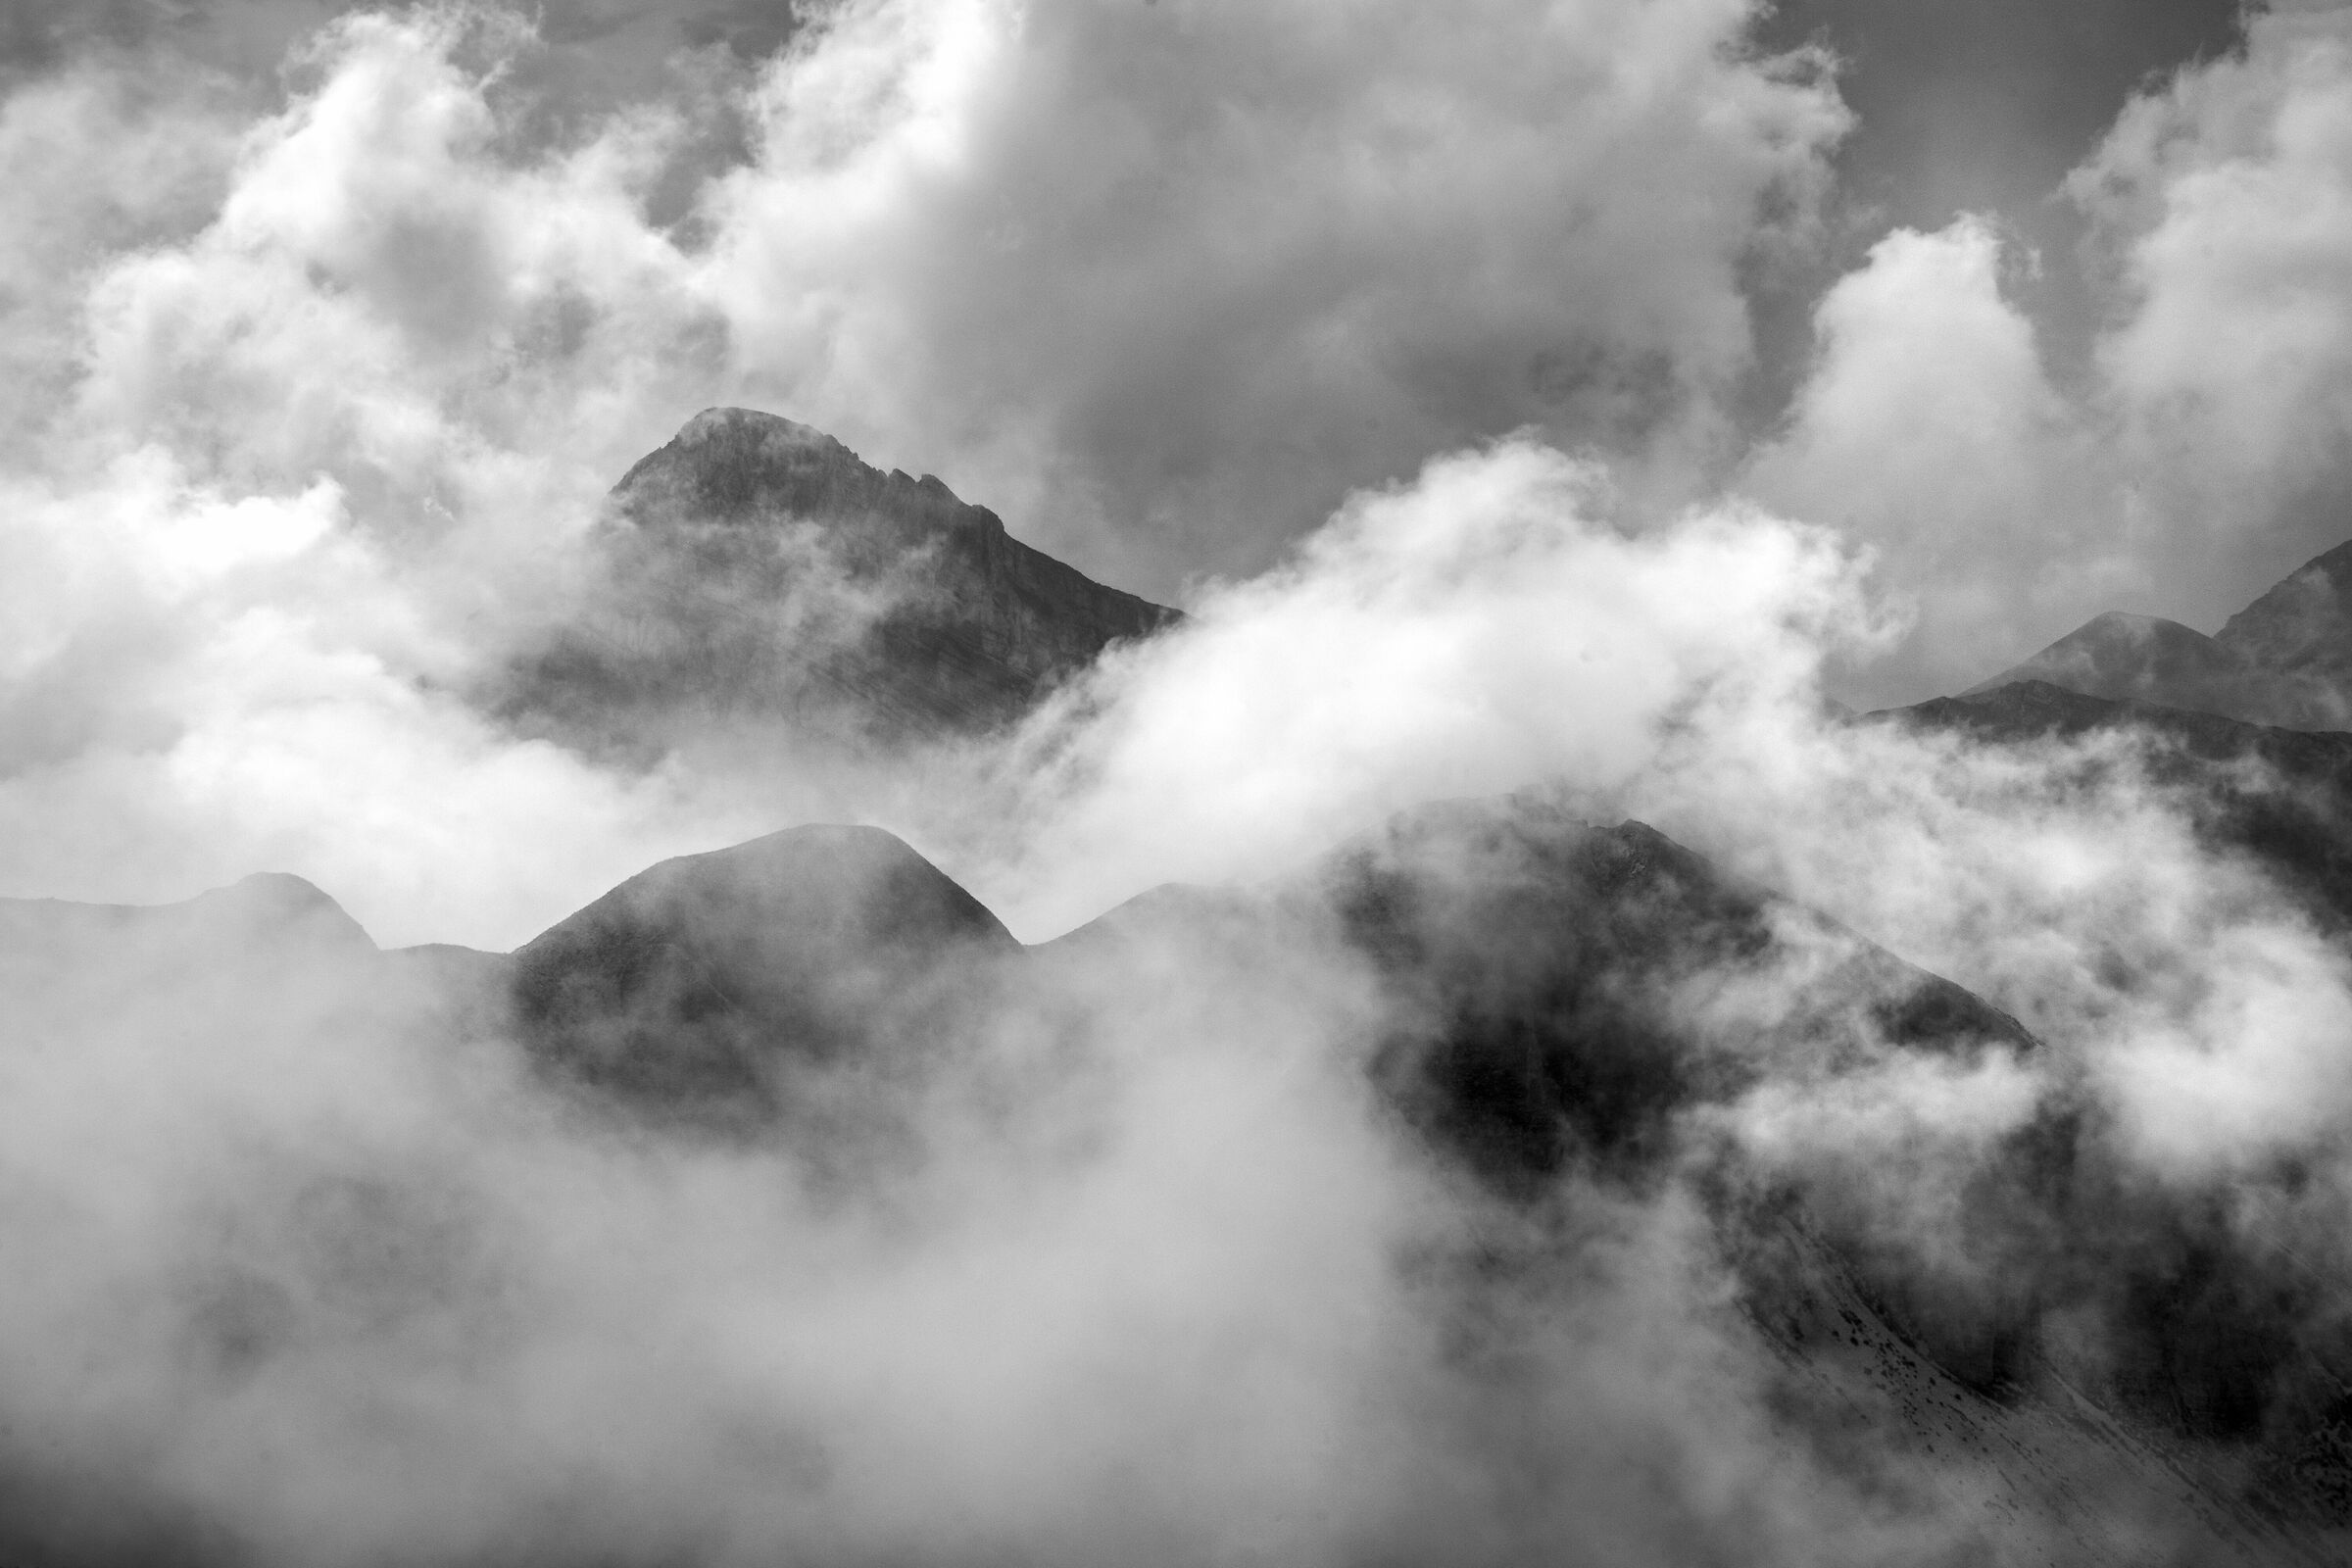 In the clouds on the Gran Sasso complex...